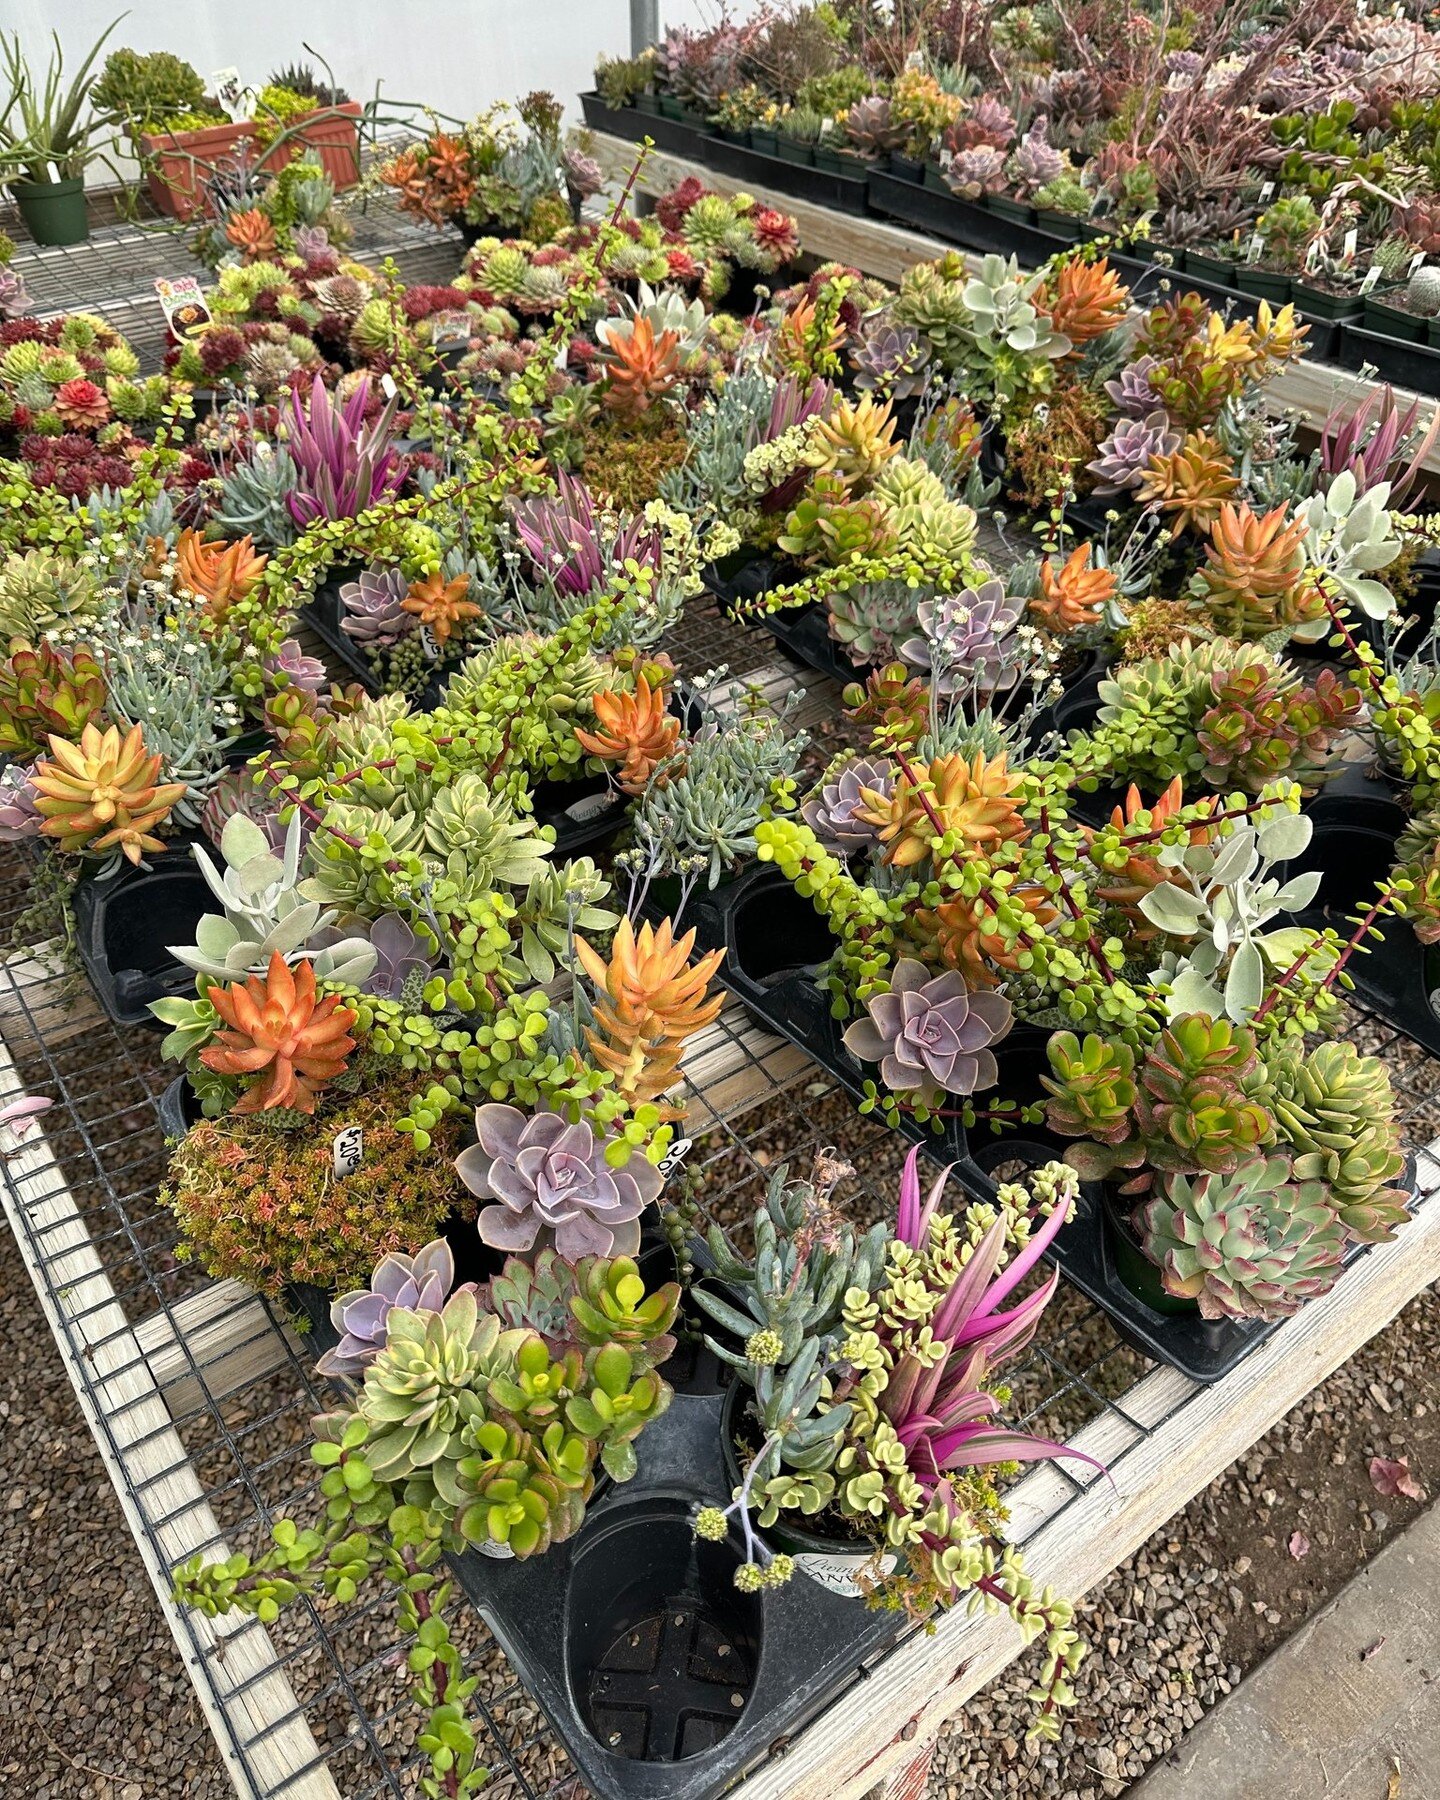 We carry a full line of Tropical House Plants, along with a wide array of succulents, herb plants, and so much more! Stop in today, say hi to Brenden, grab a gift card for your favorite friend and enjoy our free, warm greenhouse air! See you at Pines